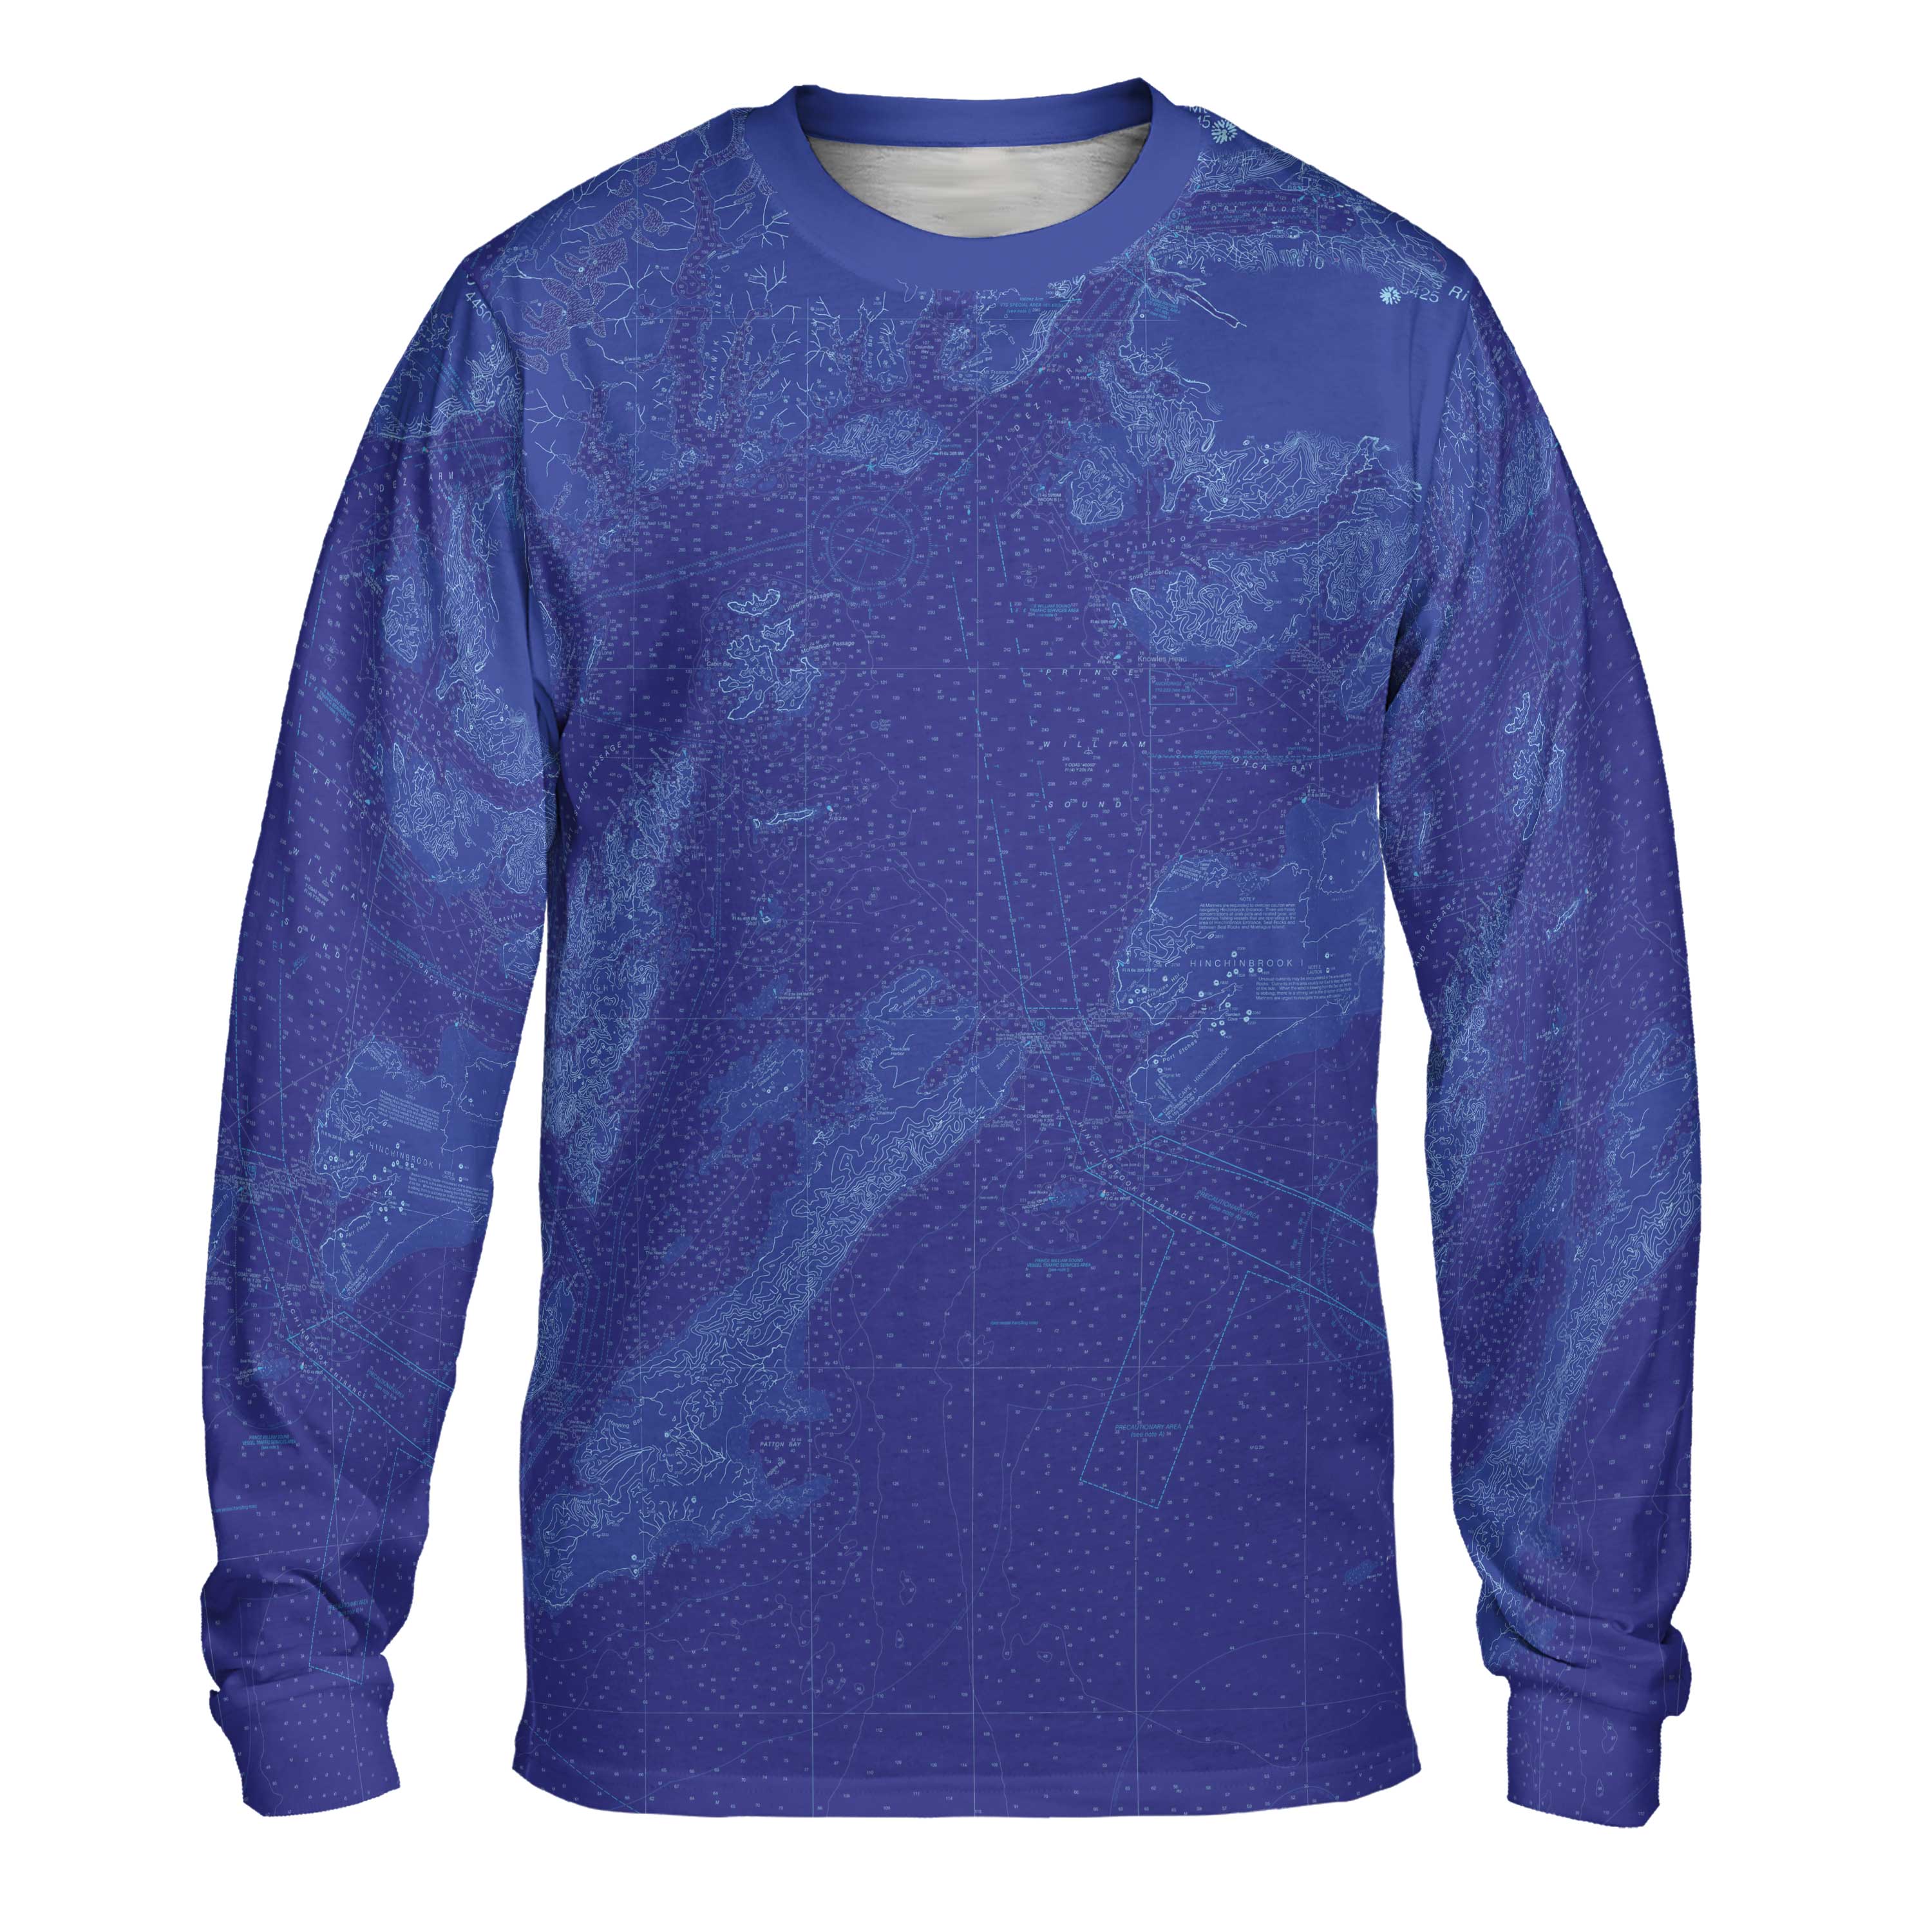 The Prince William Sound Blue Long Sleeve Tee